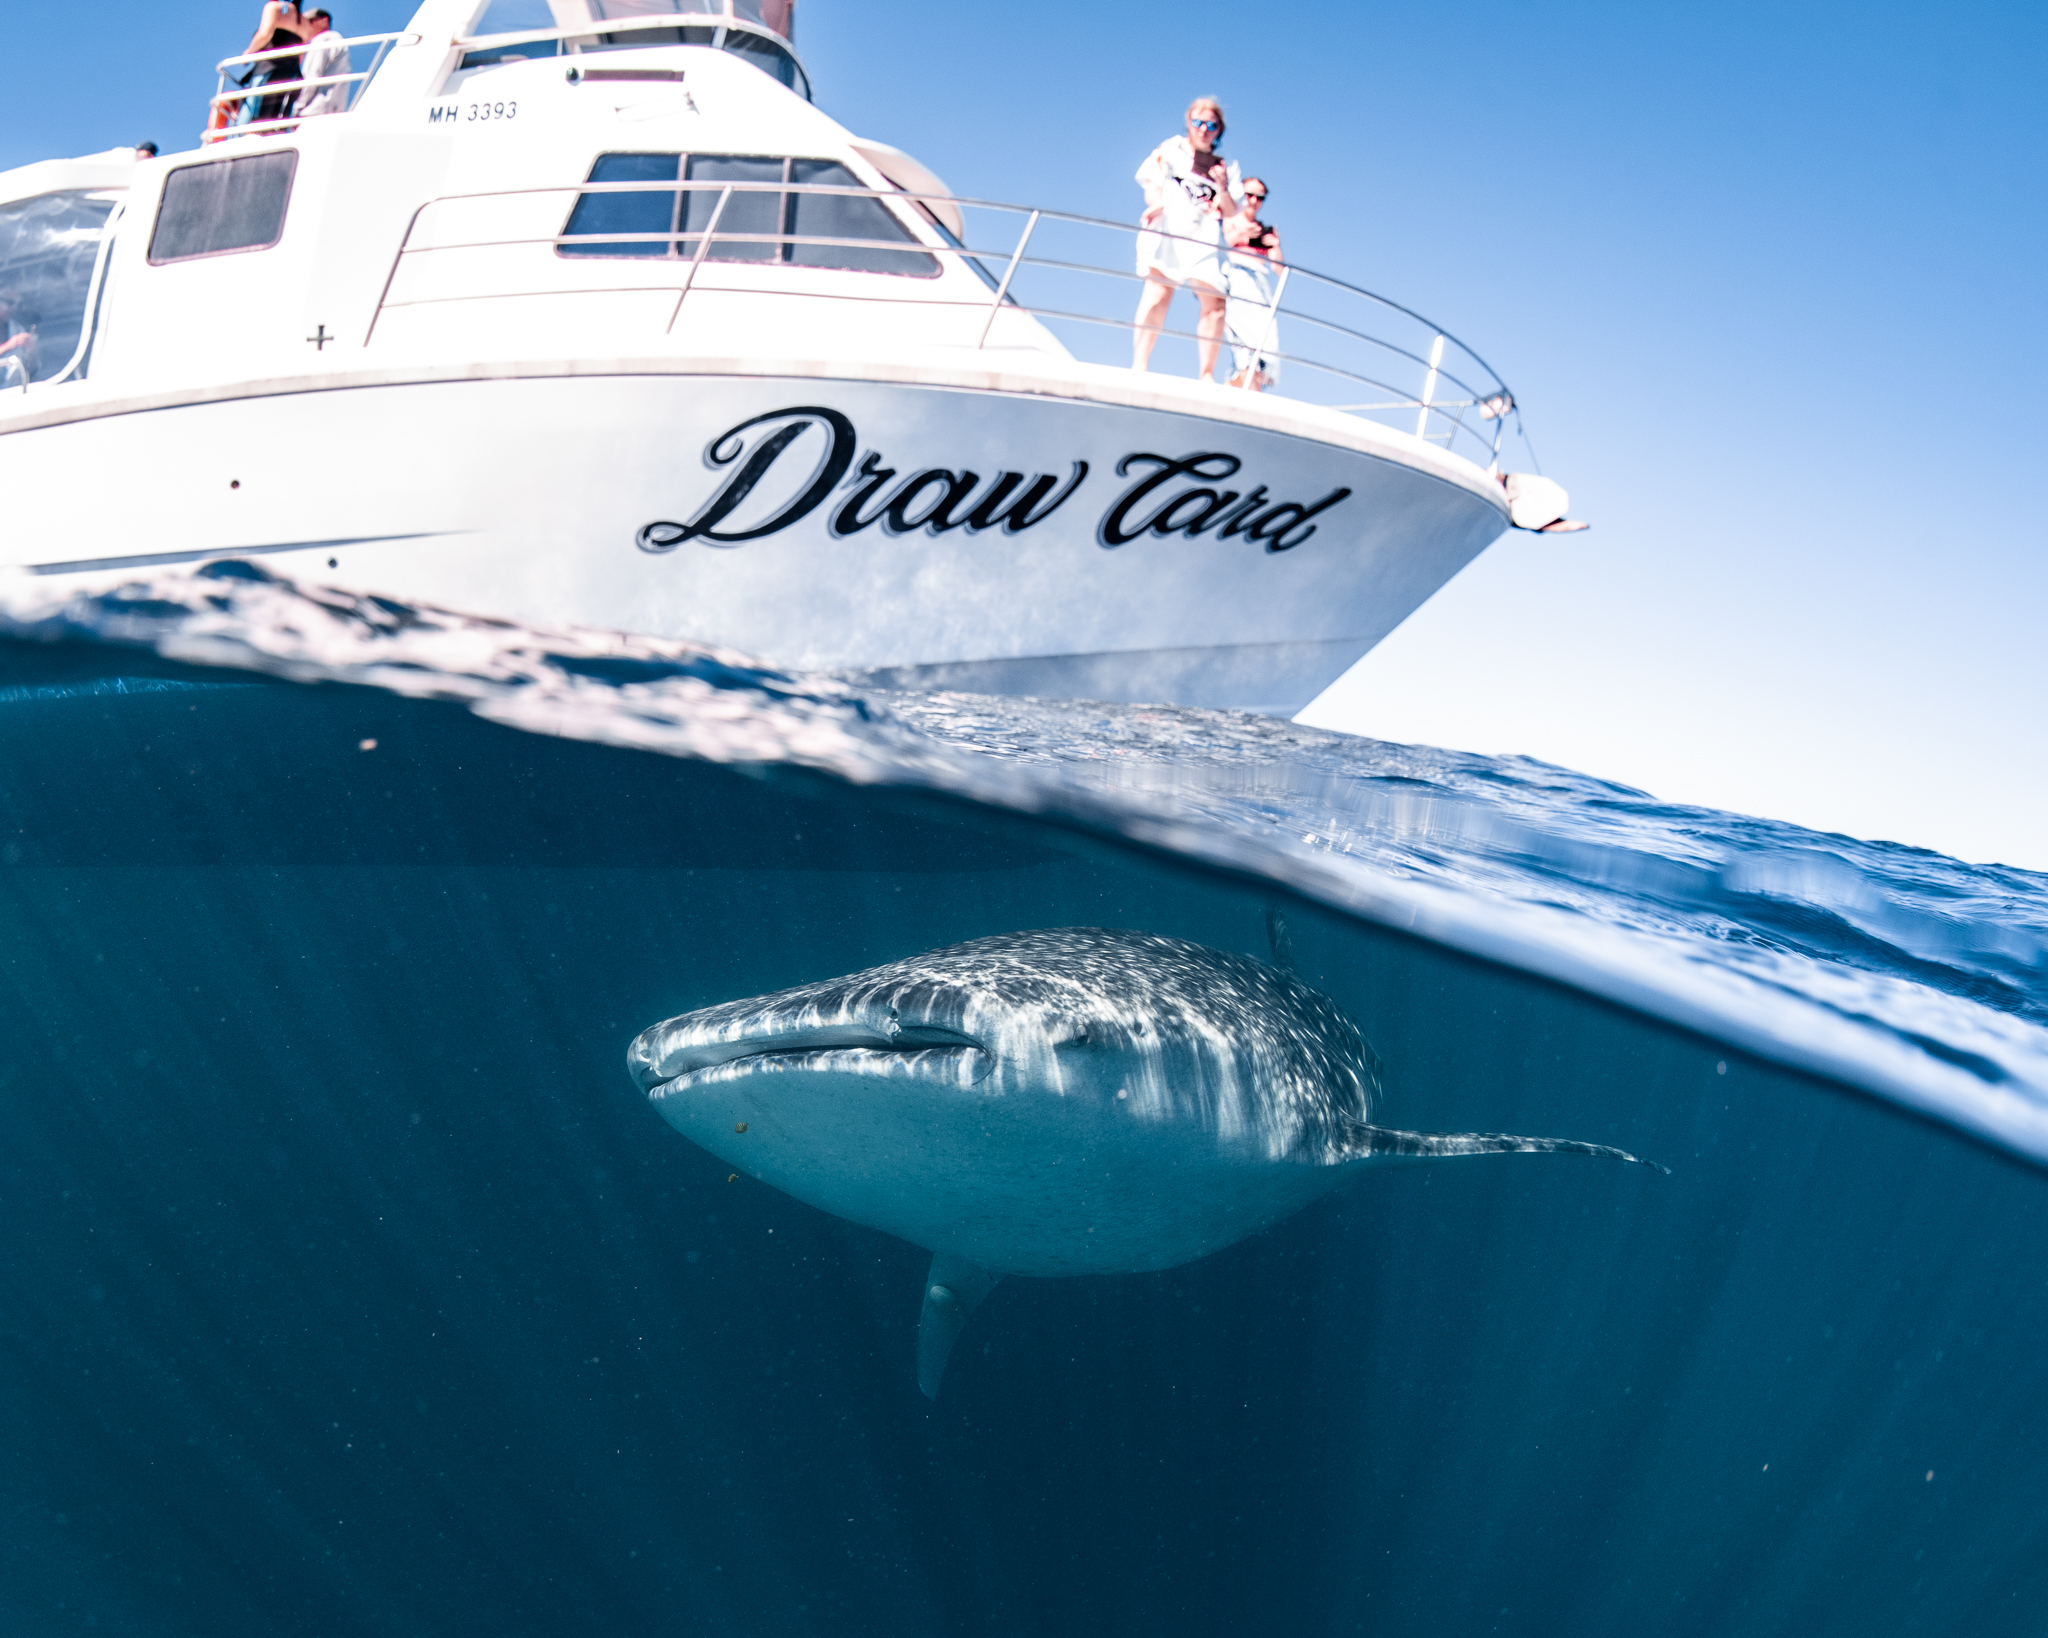 Whale Shark and Boat